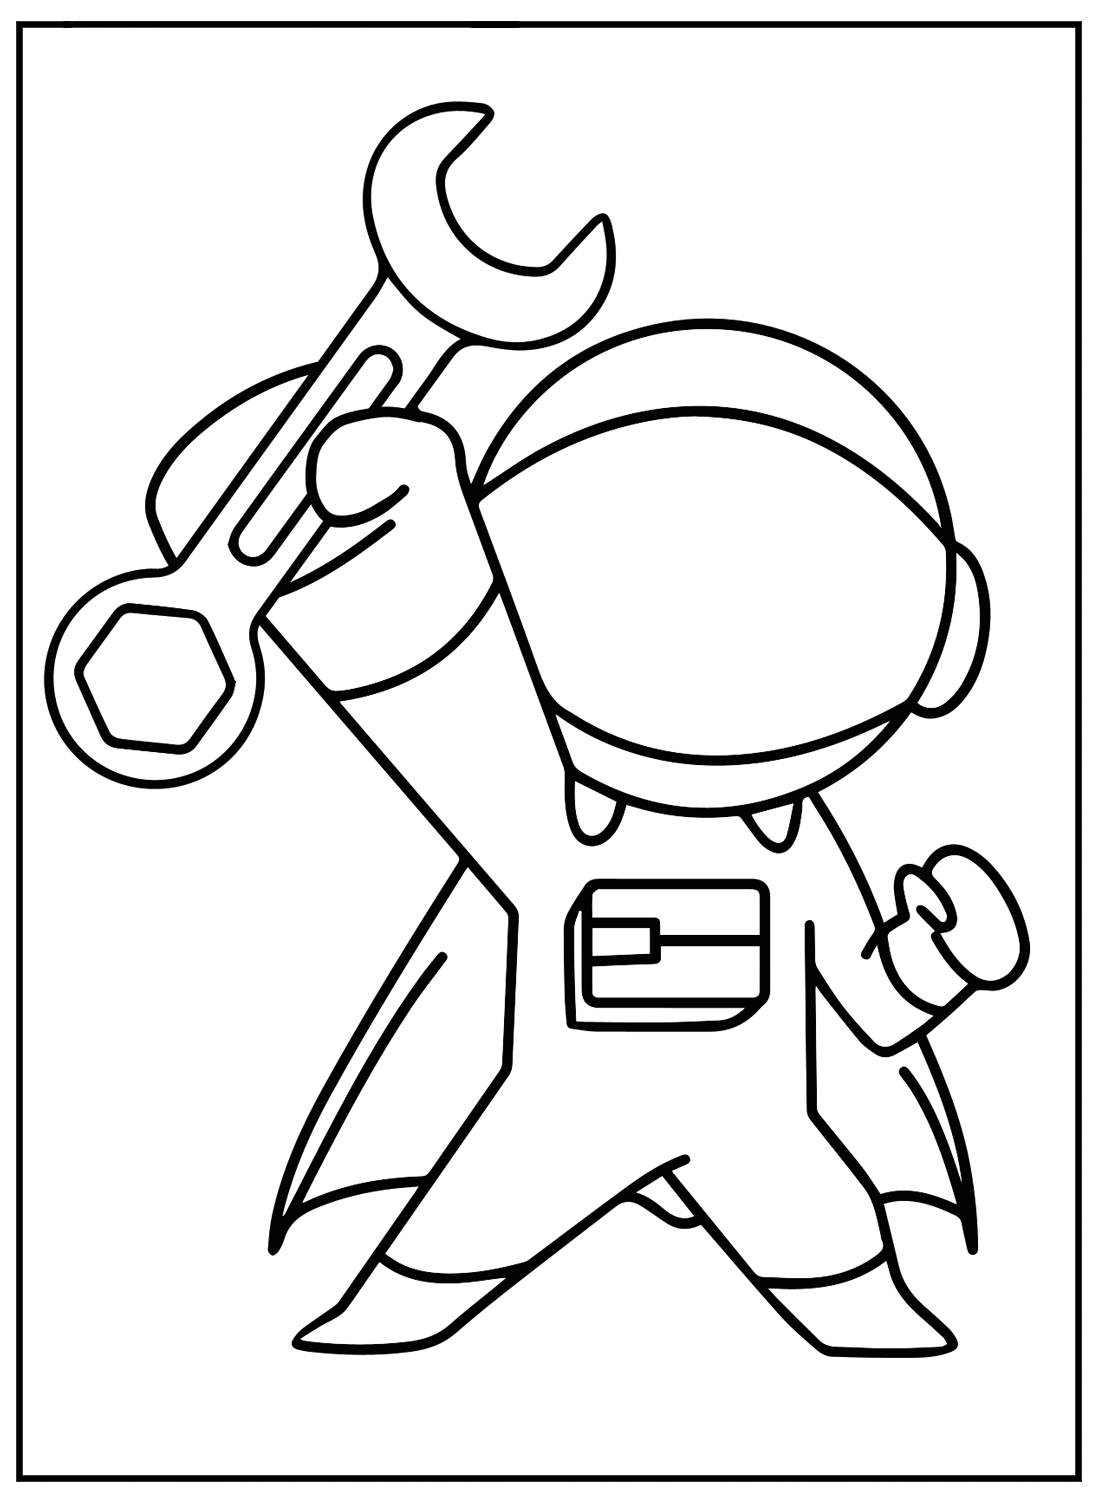 Images Wrench Coloring Pages